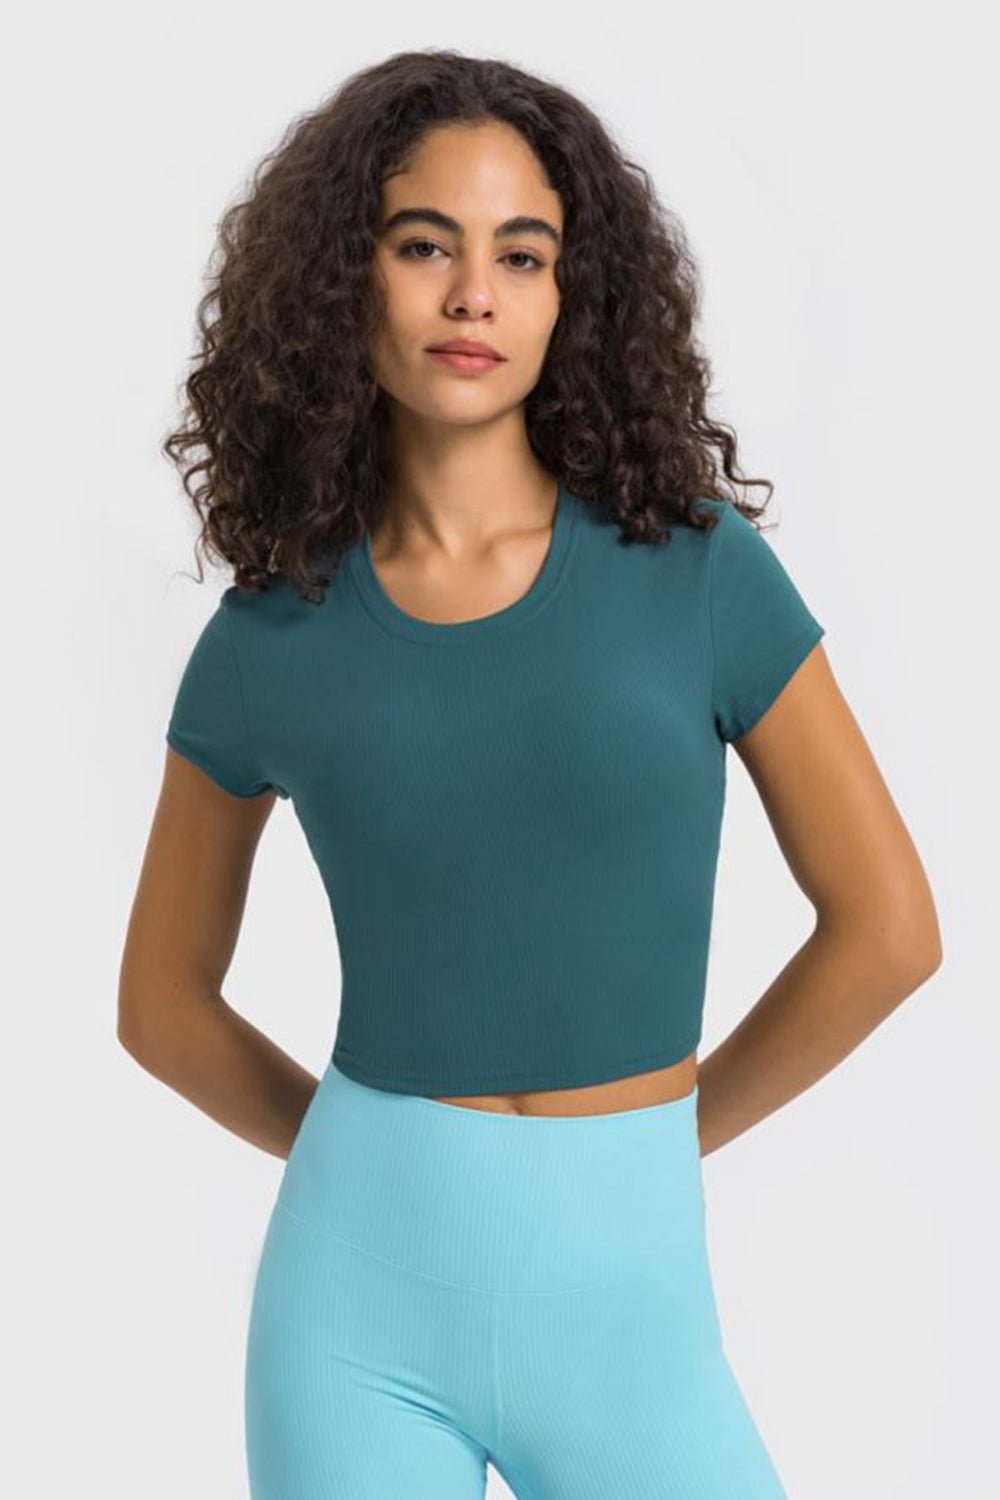 Embrace Your Beauty - Reveal Your Passion - Fall in Love with Our Round Neck Short Sleeve Cropped Sports T-Shirt. - Guy Christopher